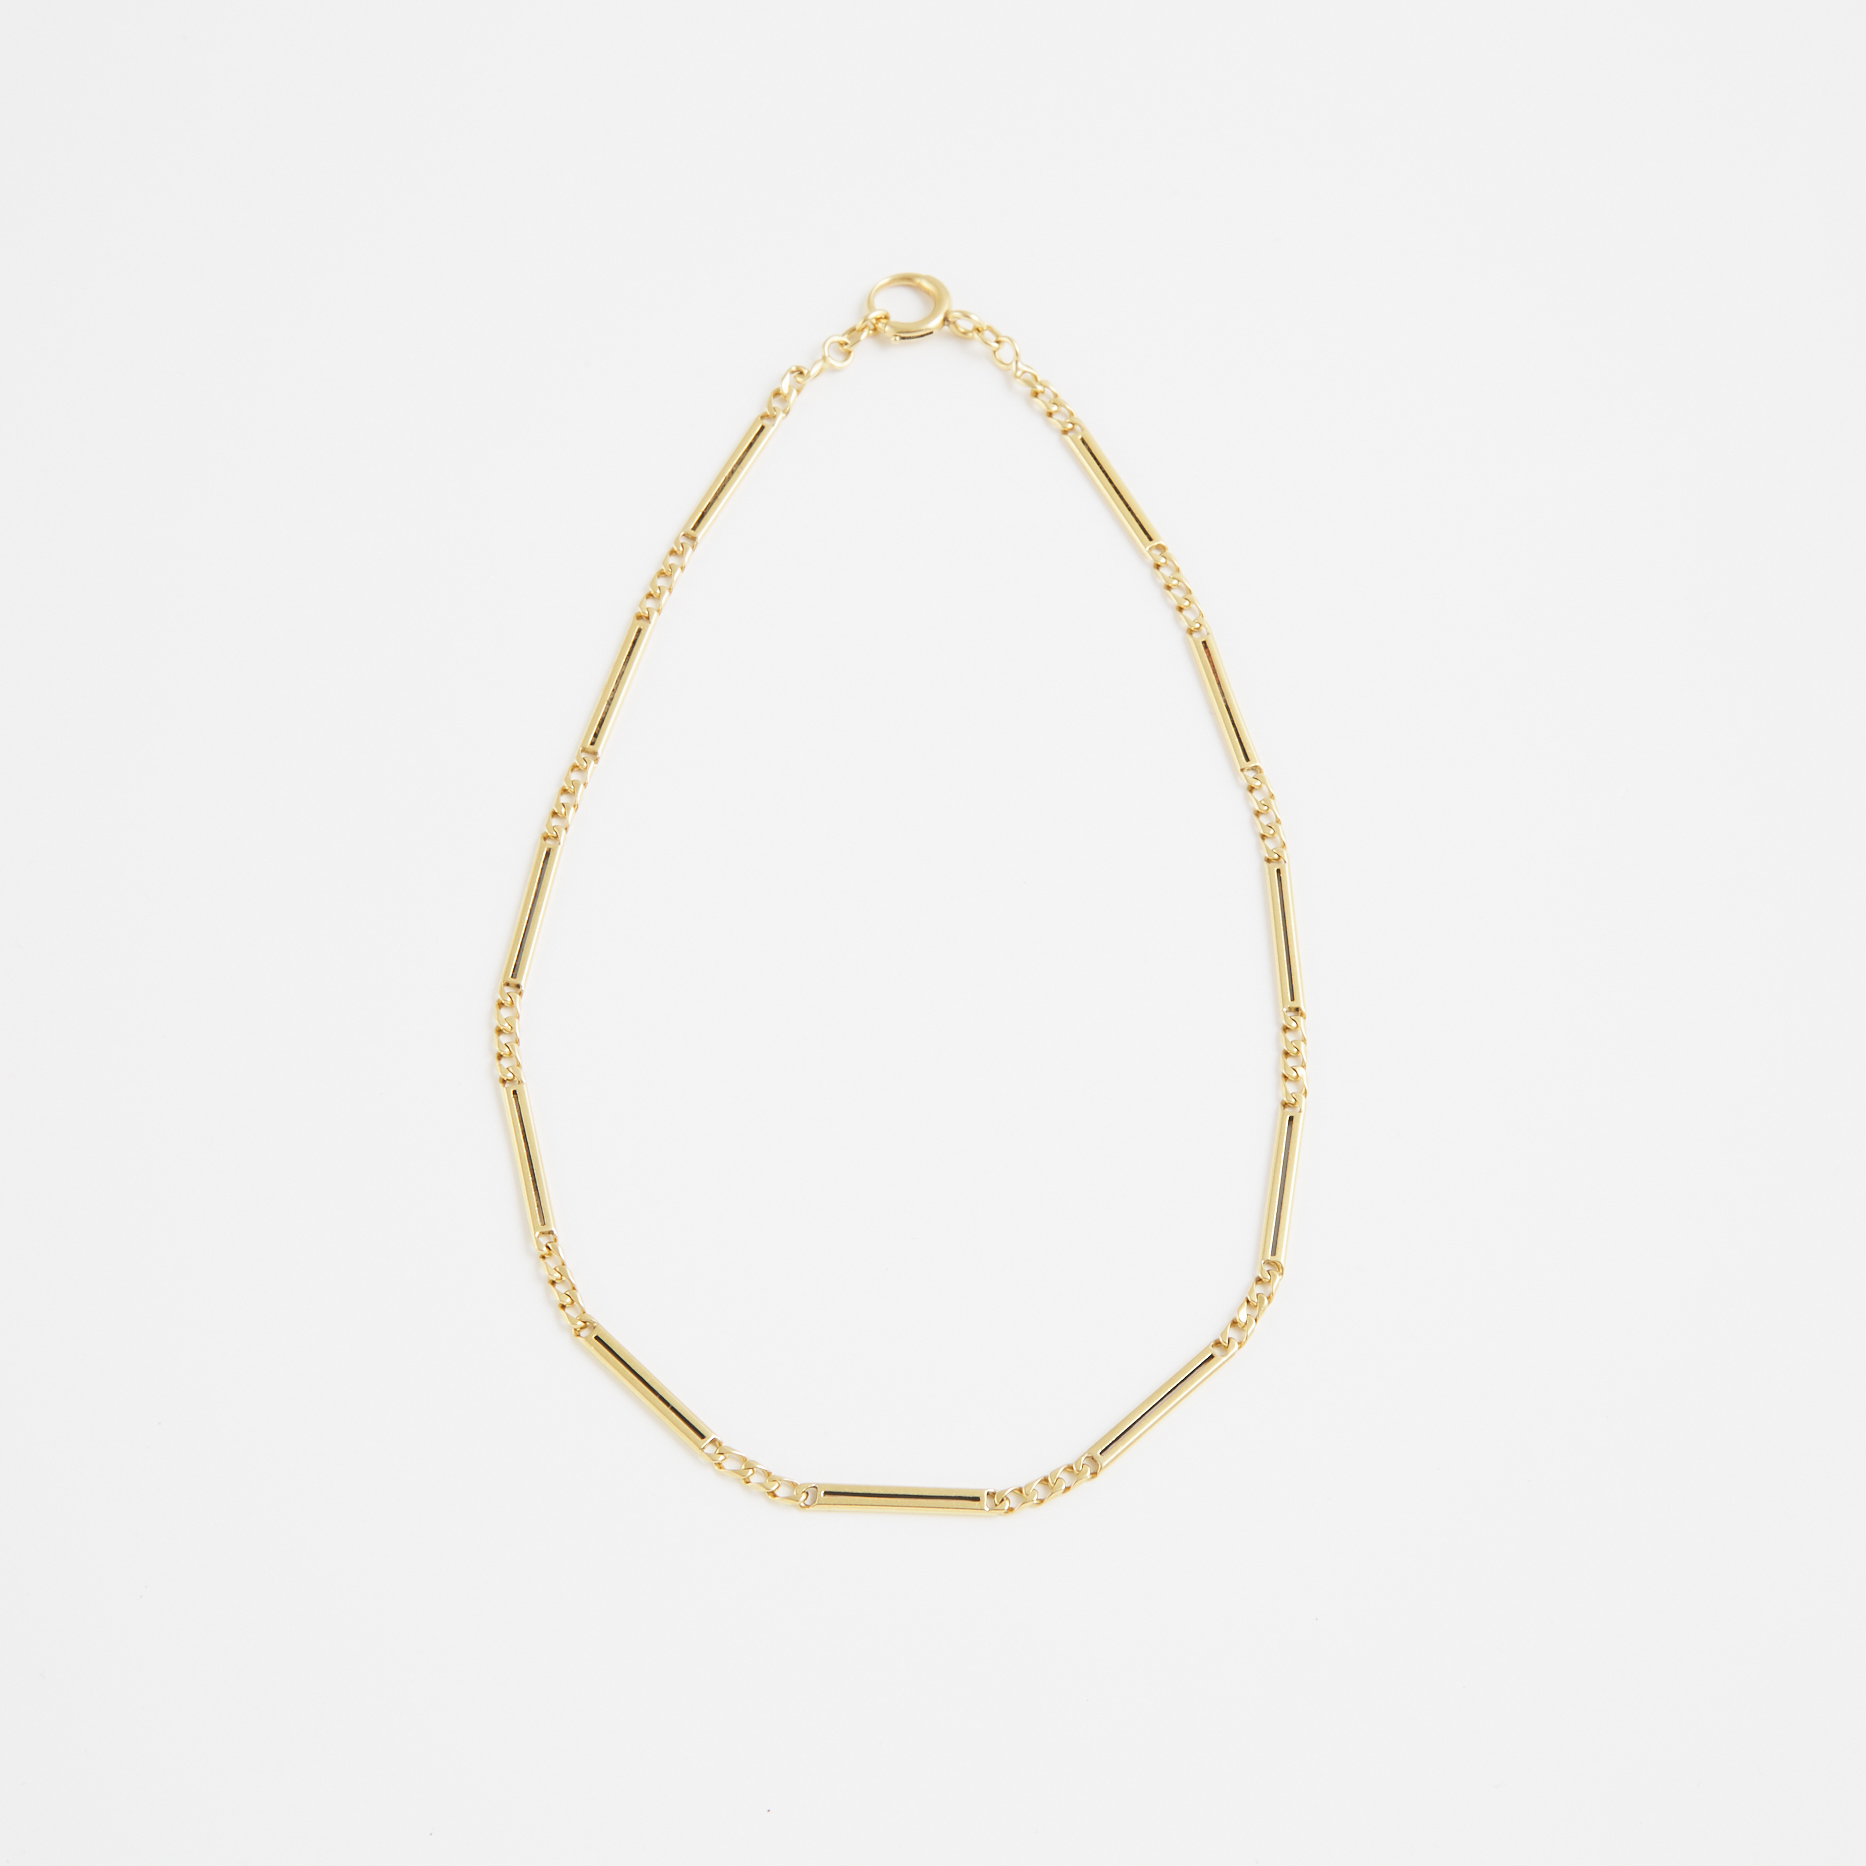 French 18k Yellow Gold Bar Link Necklace